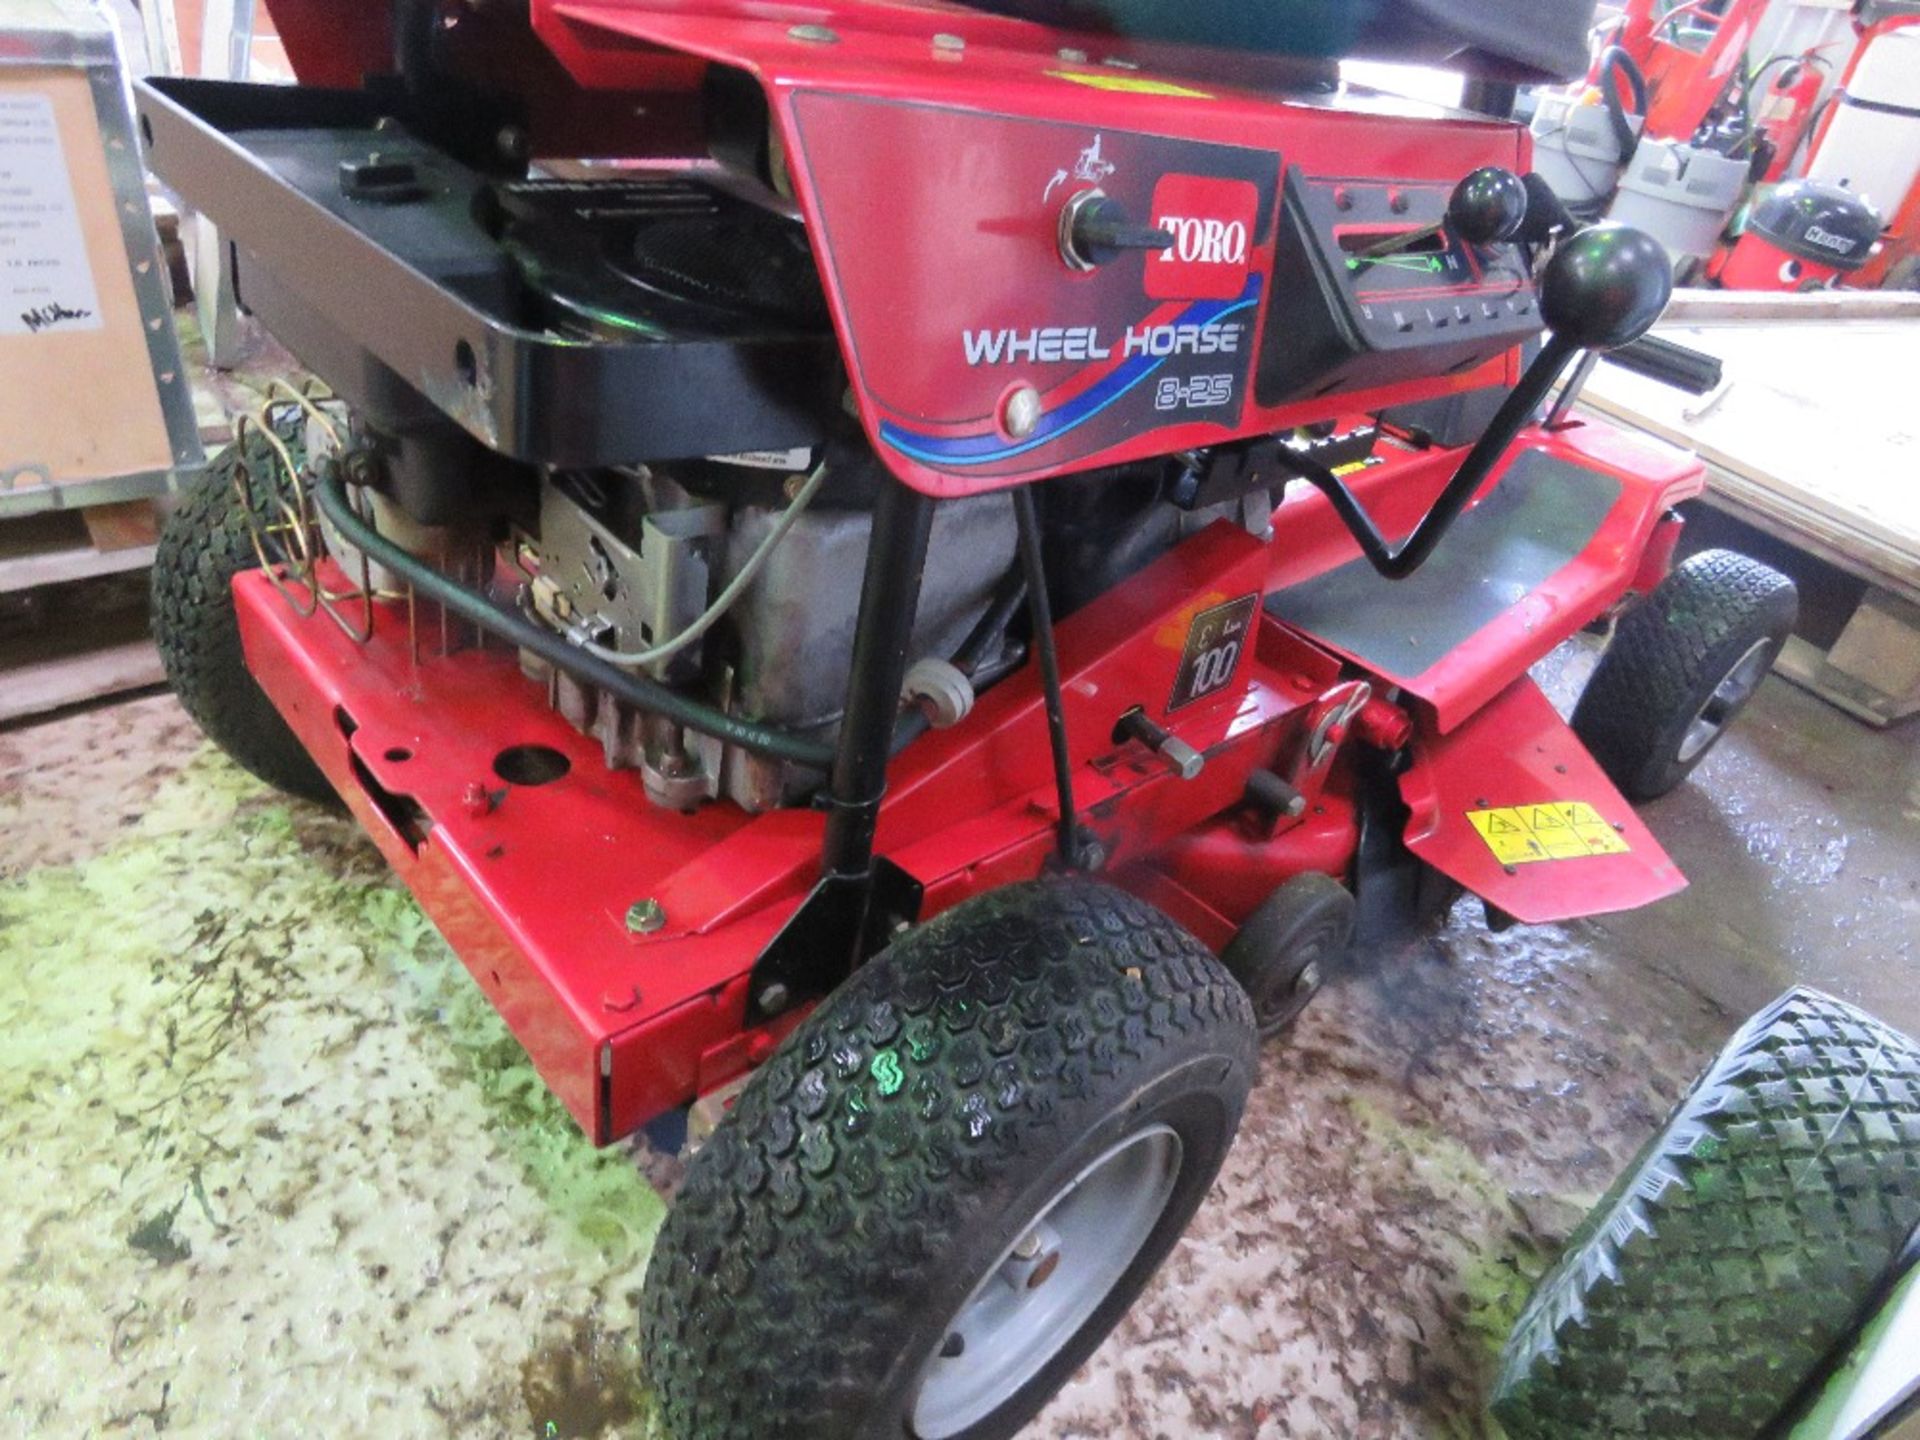 WHEELHORSE 8-25 RIDE ON MOWER. BATTERY LOW, UNTESTED.....THIS LOT IS SOLD UNDER THE AUCTIONEERS MARG - Image 5 of 7